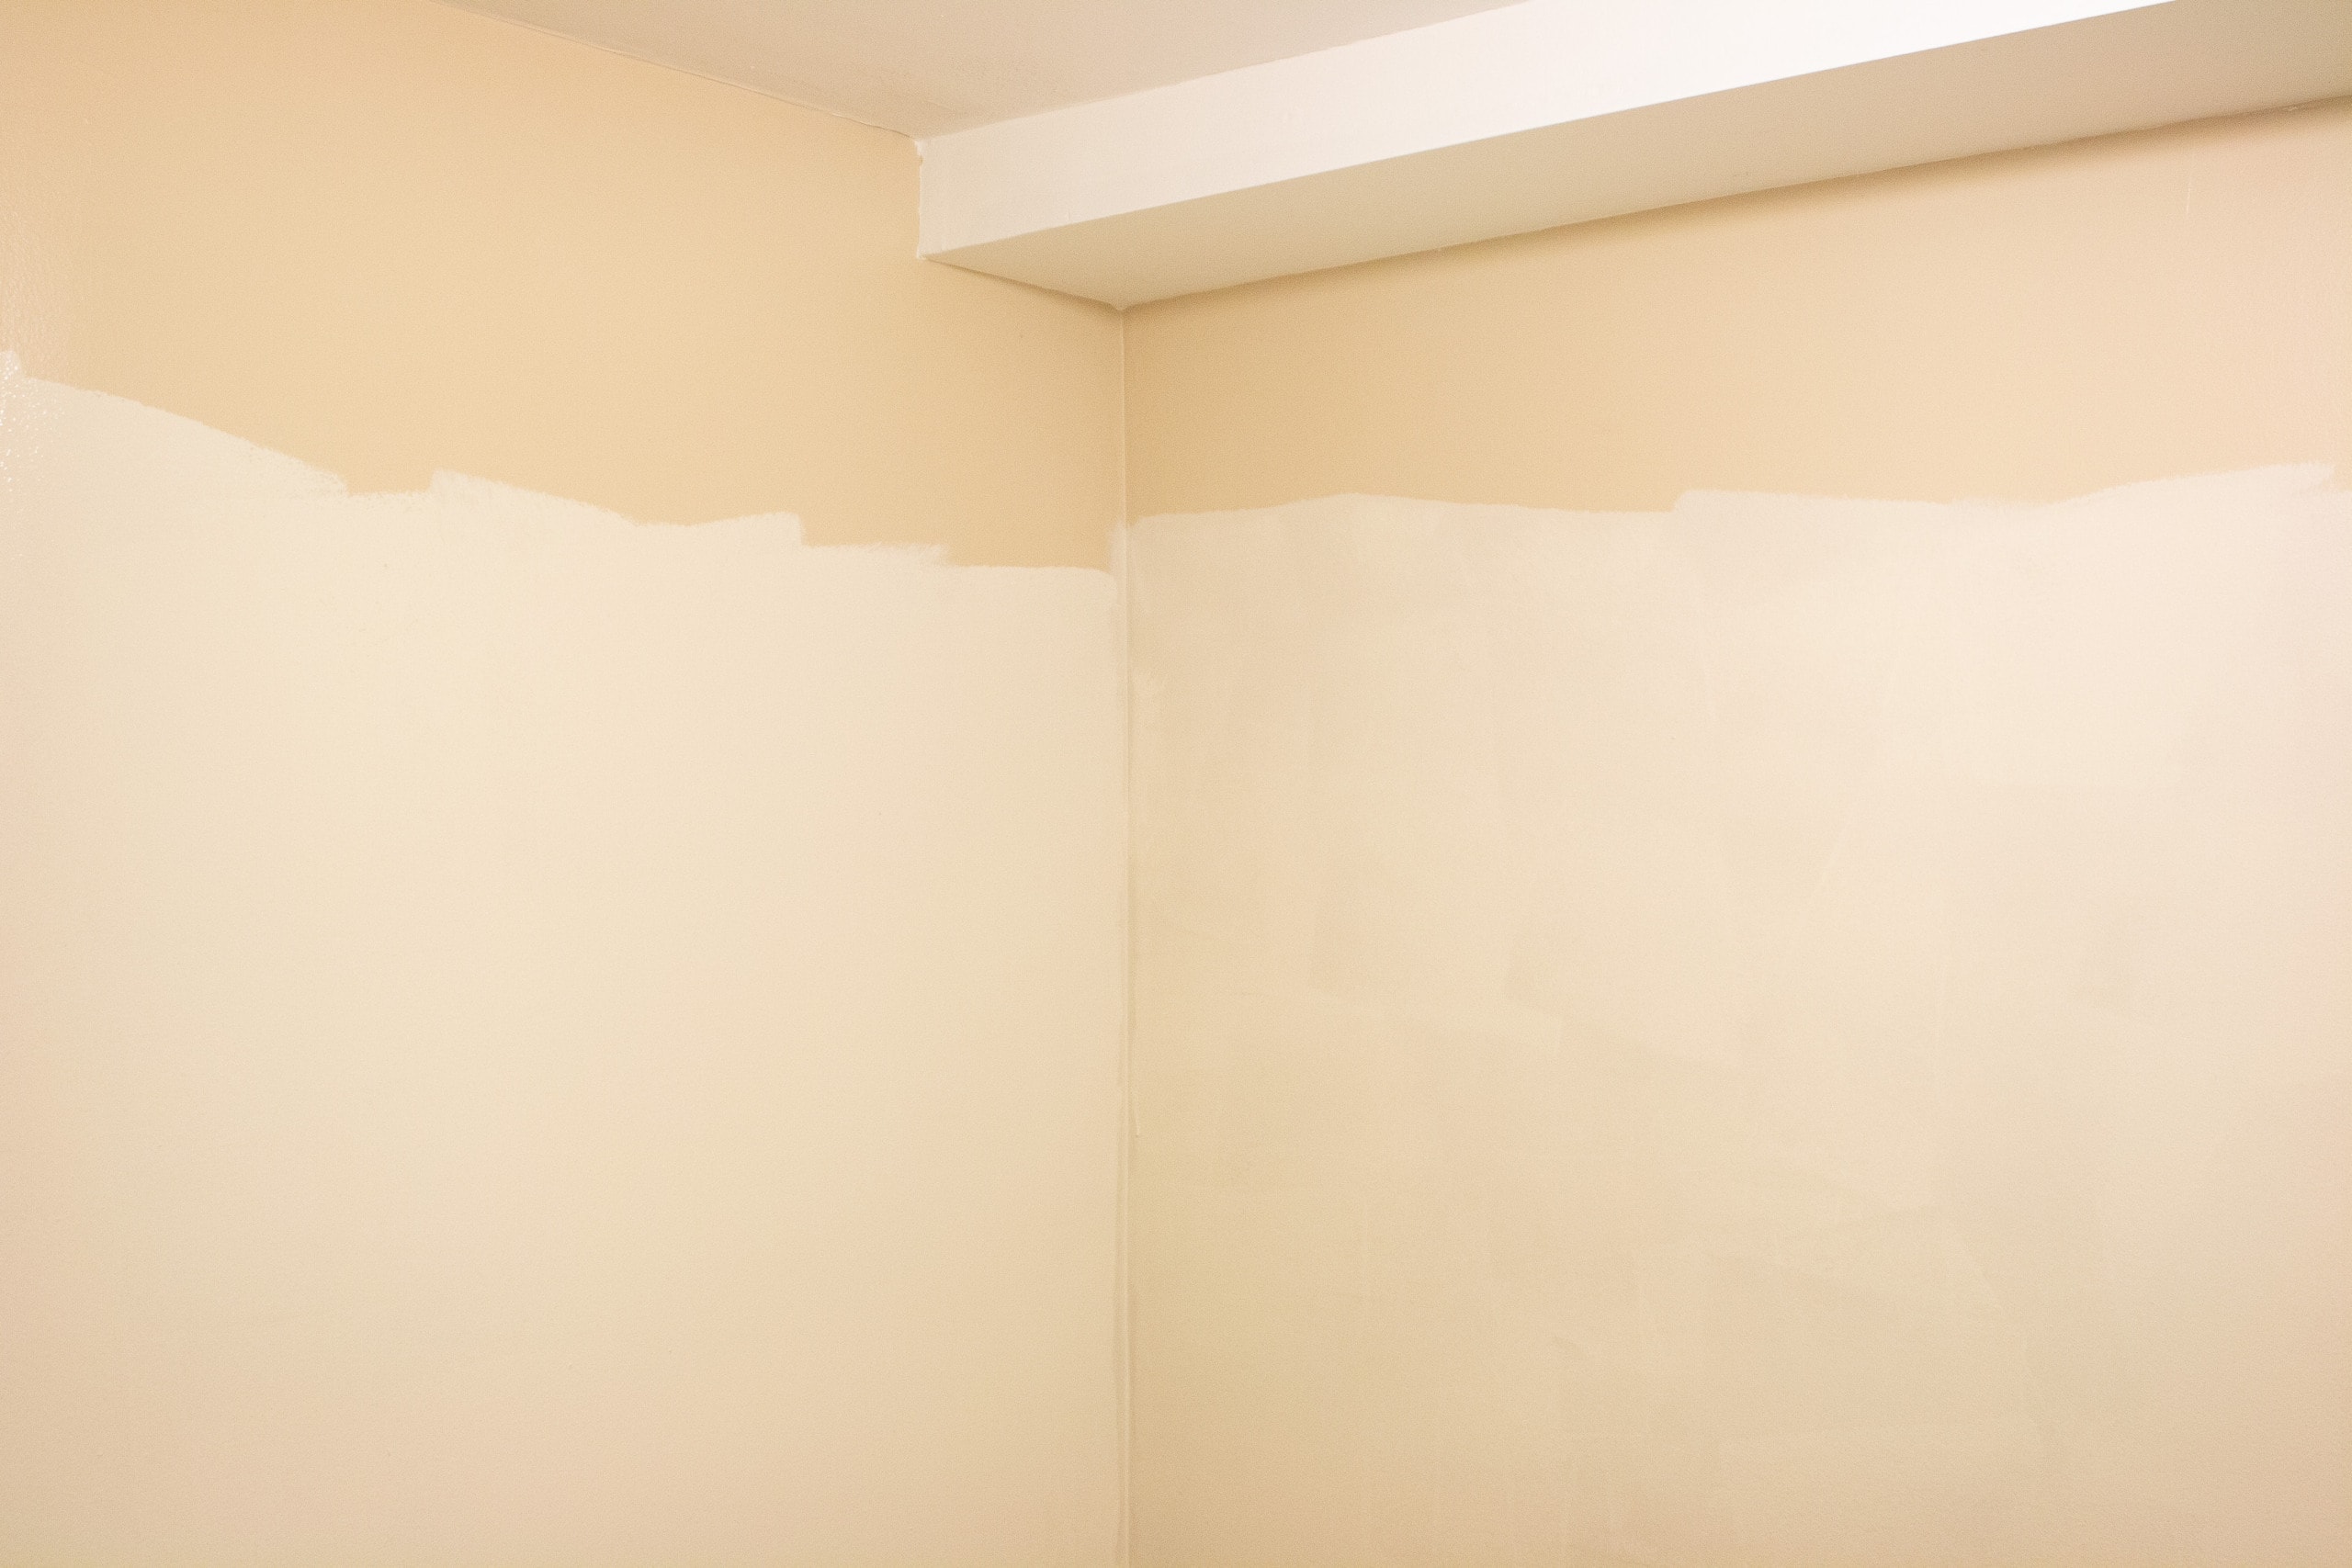 Painting two-tone walls in our basement bathroom